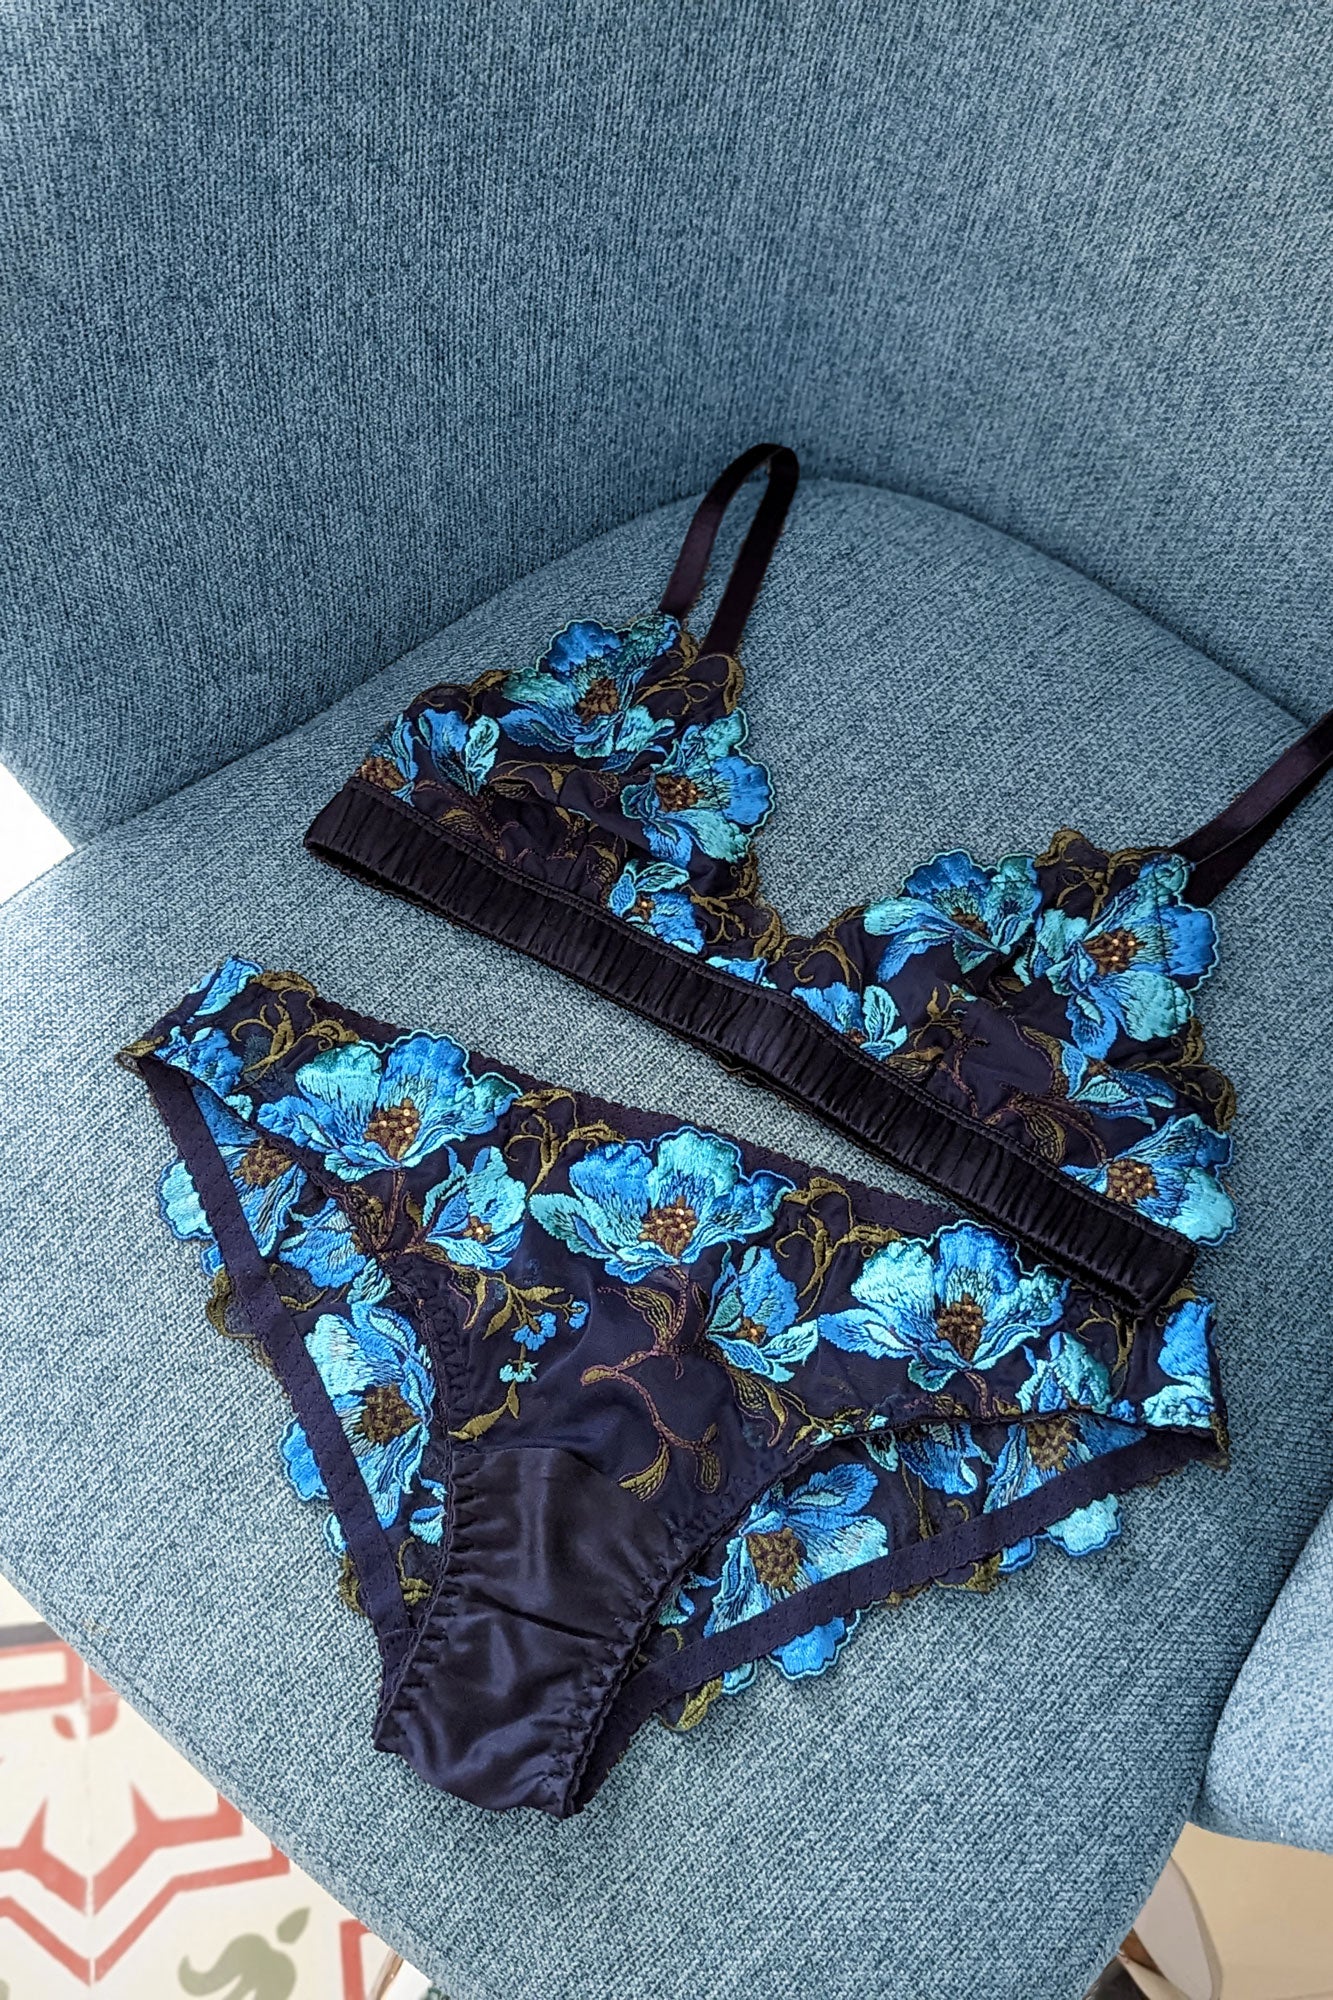 Love-in-Idleness bra and silk lingerie set in blue floral embroidery